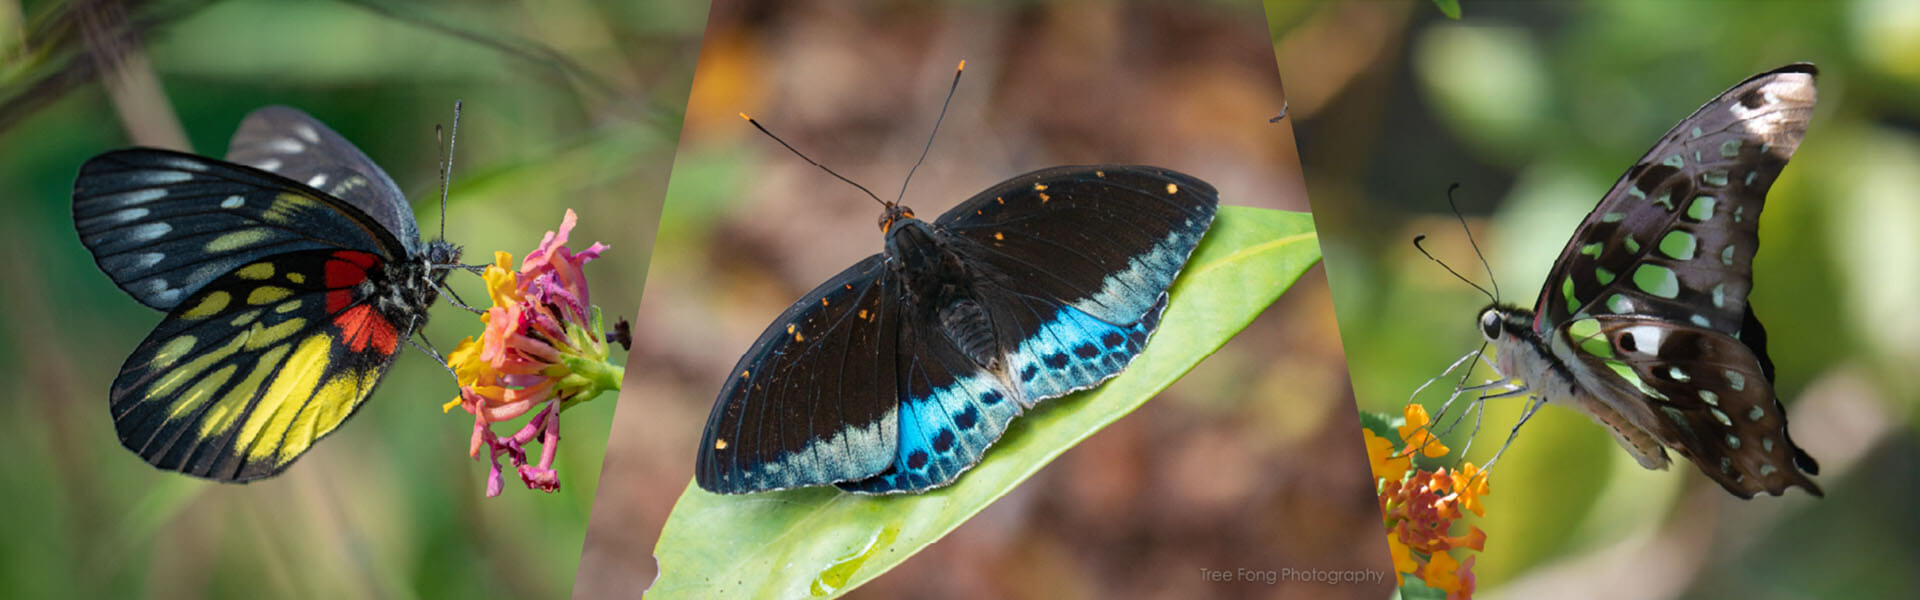 Hong Kong Butterfly Ecology and Identification Course